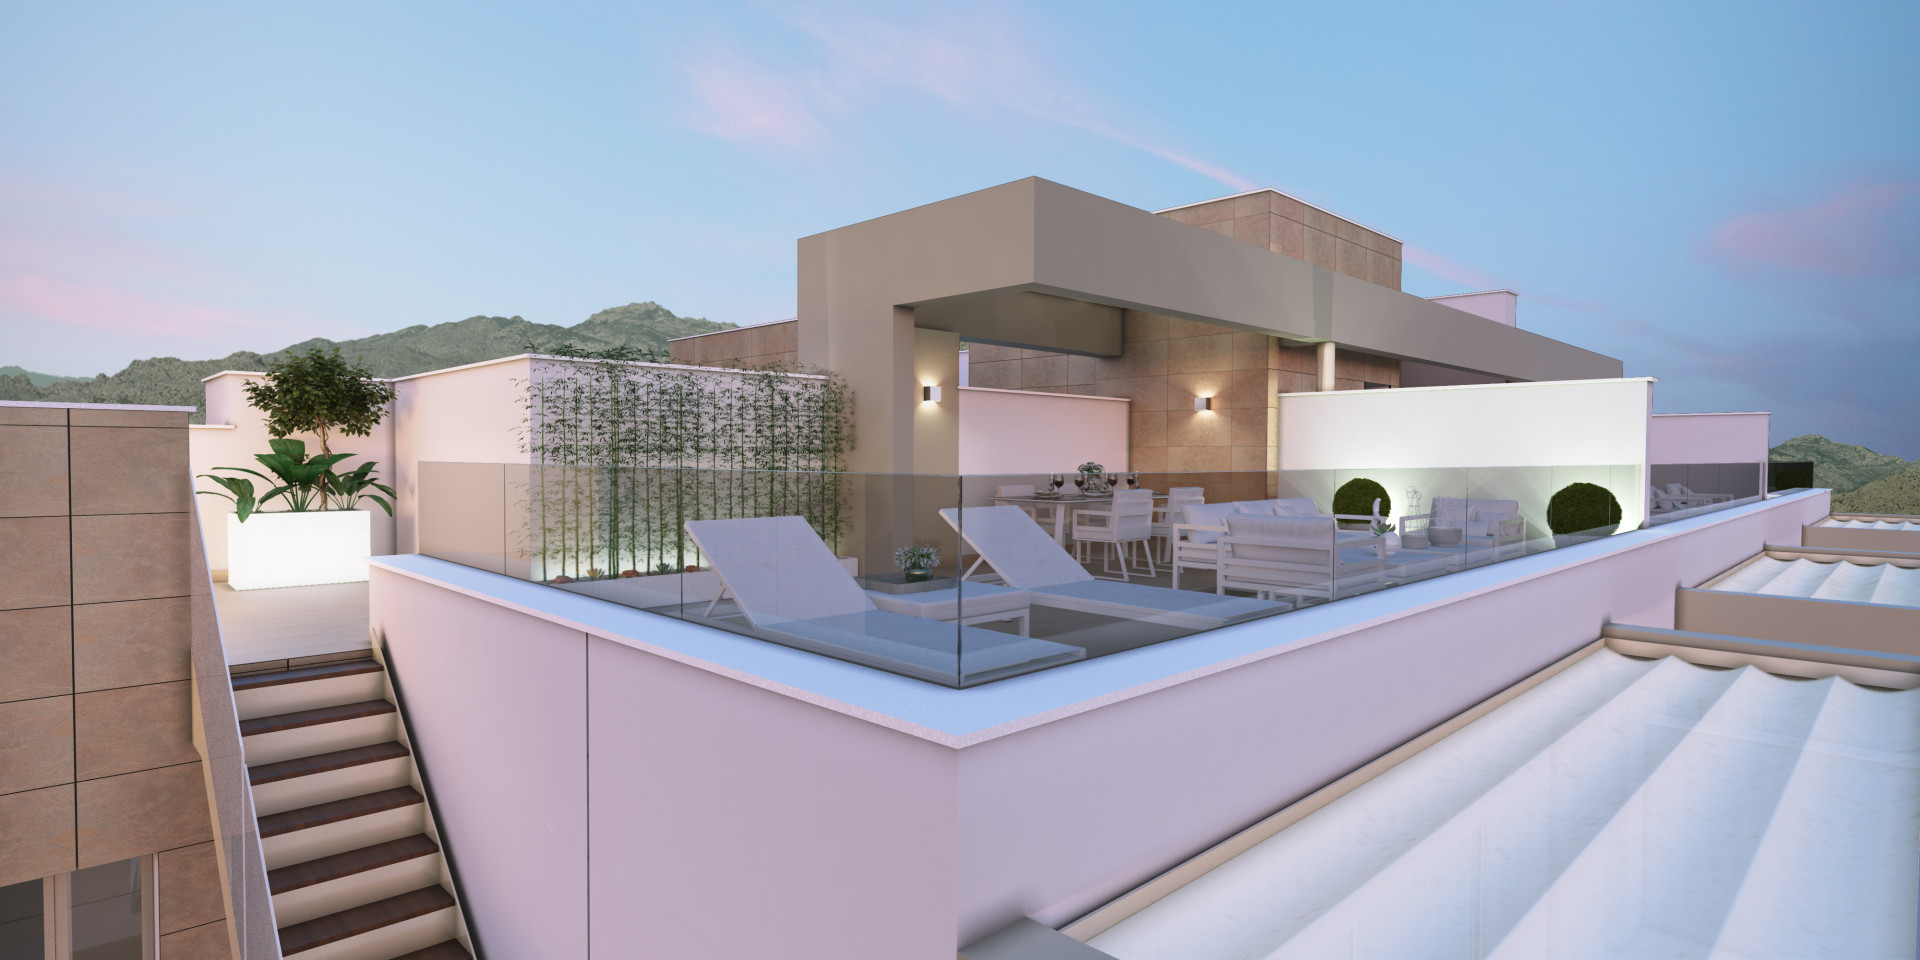 New contemporary style apartments for sale in Mijas Costa